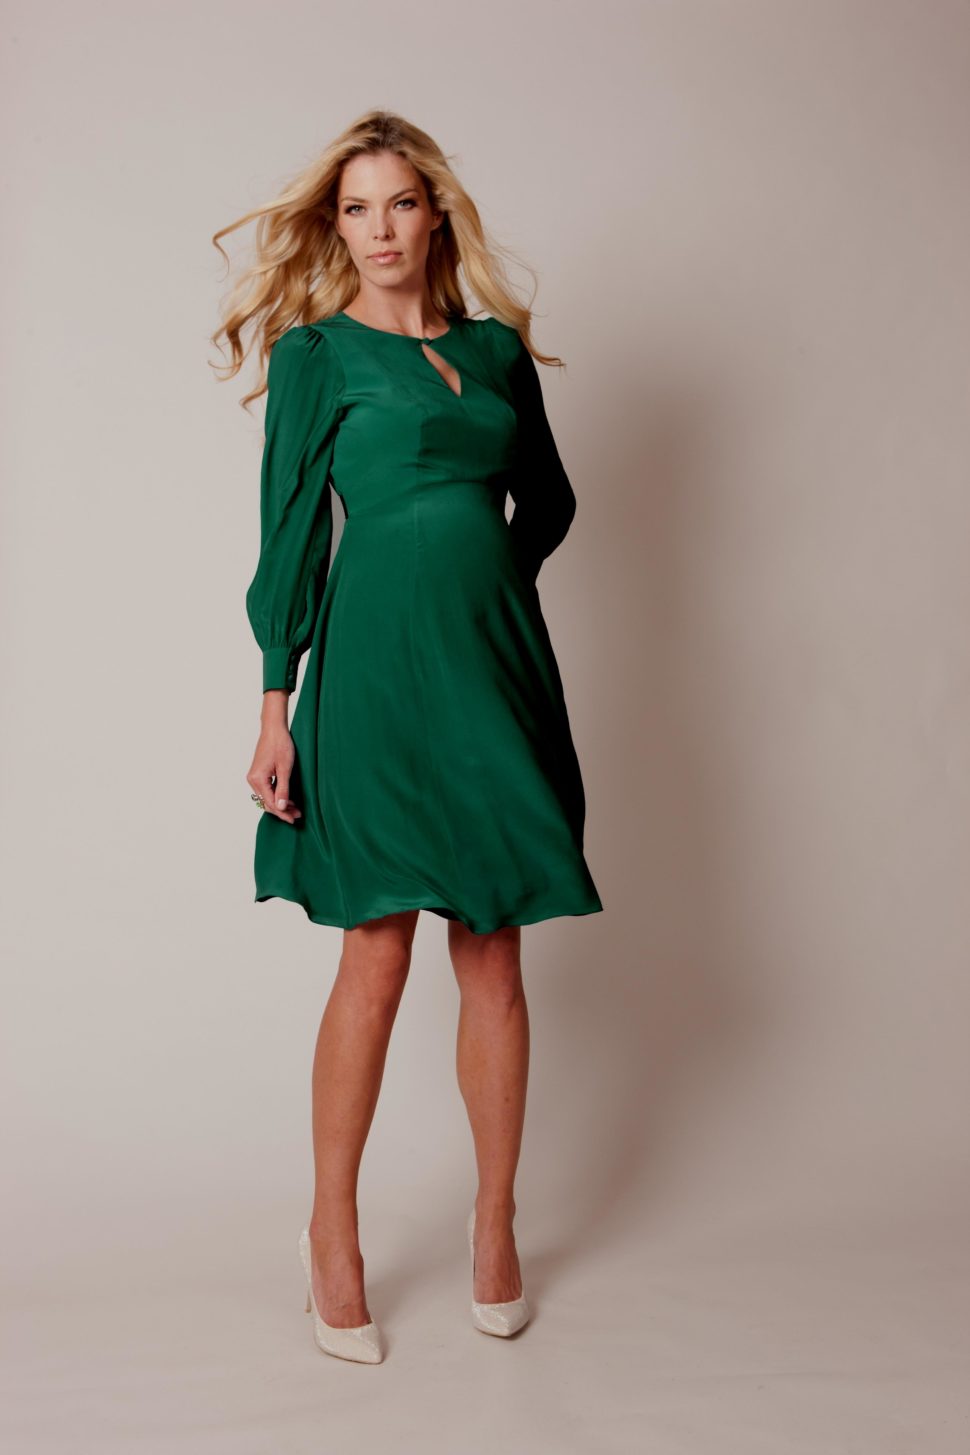 Medium Size of Baby Shower:maternity Clothes H&m Showing Lsi Keywords For Baby Shower Dresses Maternity Evening Gowns Non Maternity Dresses For Baby Shower Baby Shower Attire For Mom Maternity Blouses For Baby Shower Maternity Dresses For Baby Showers Maternity Dresses For Photoshoot